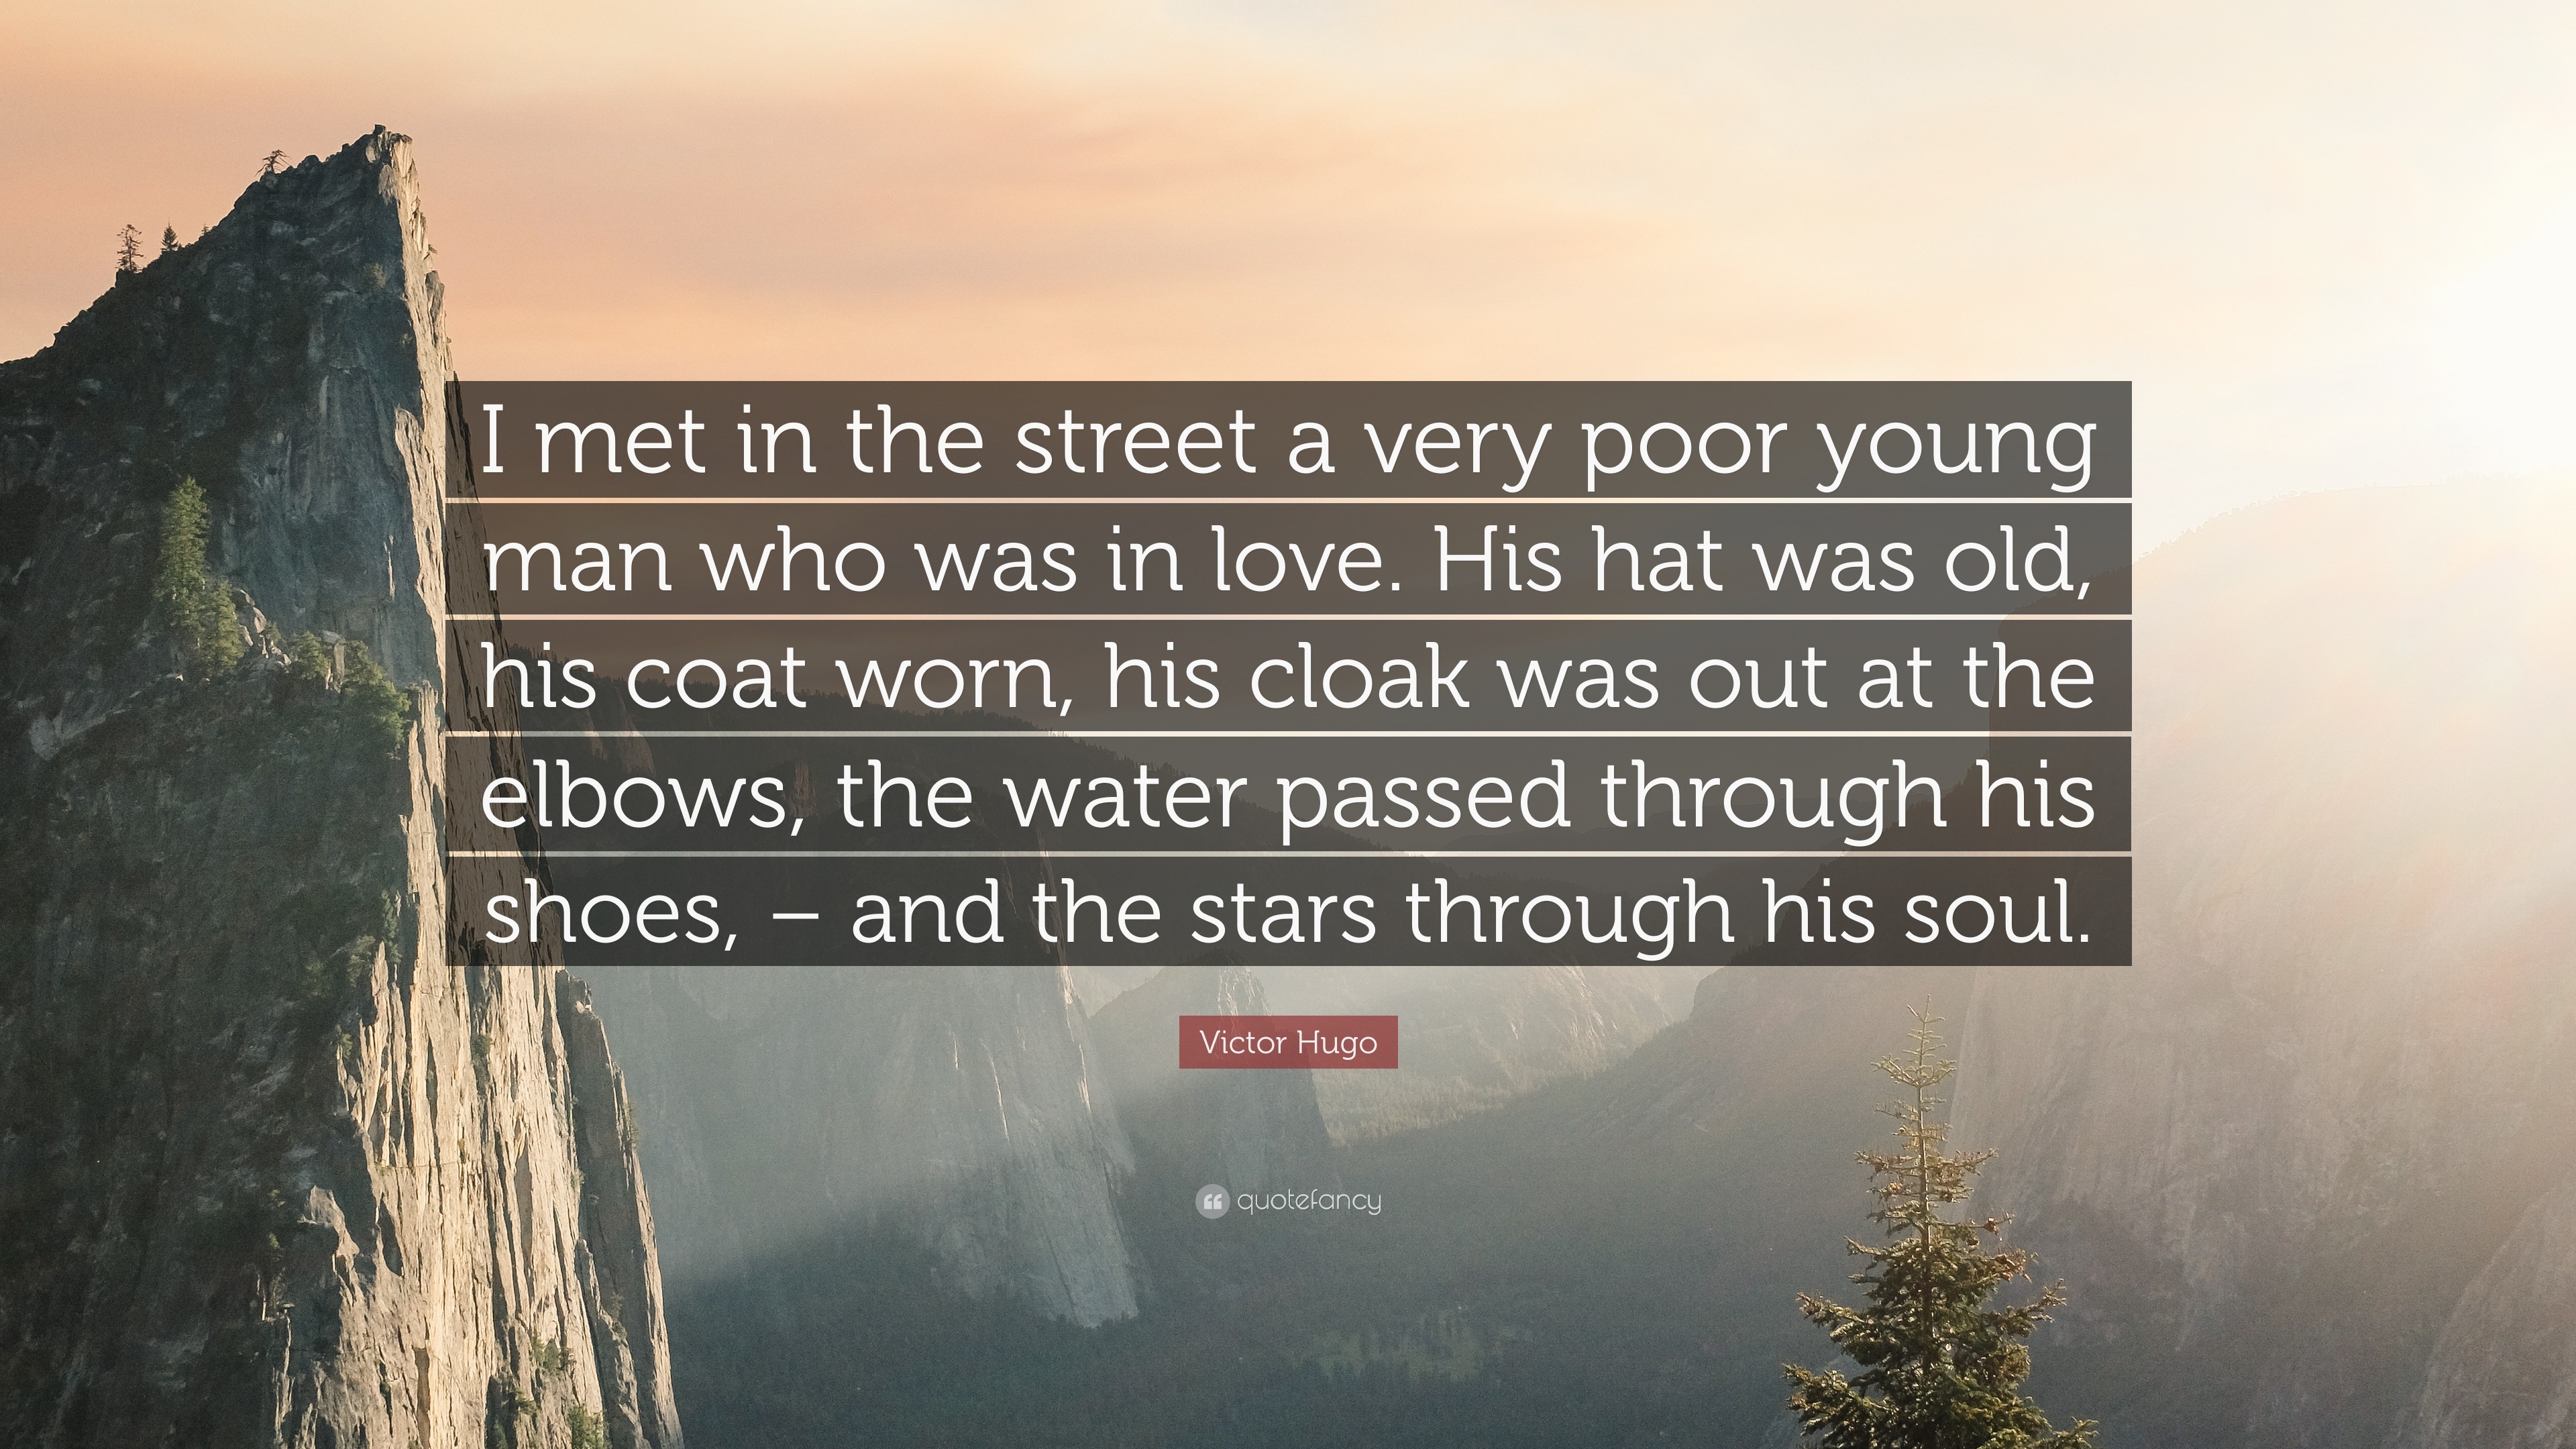 Victor Hugo Quote “I met in the street a very poor young man who